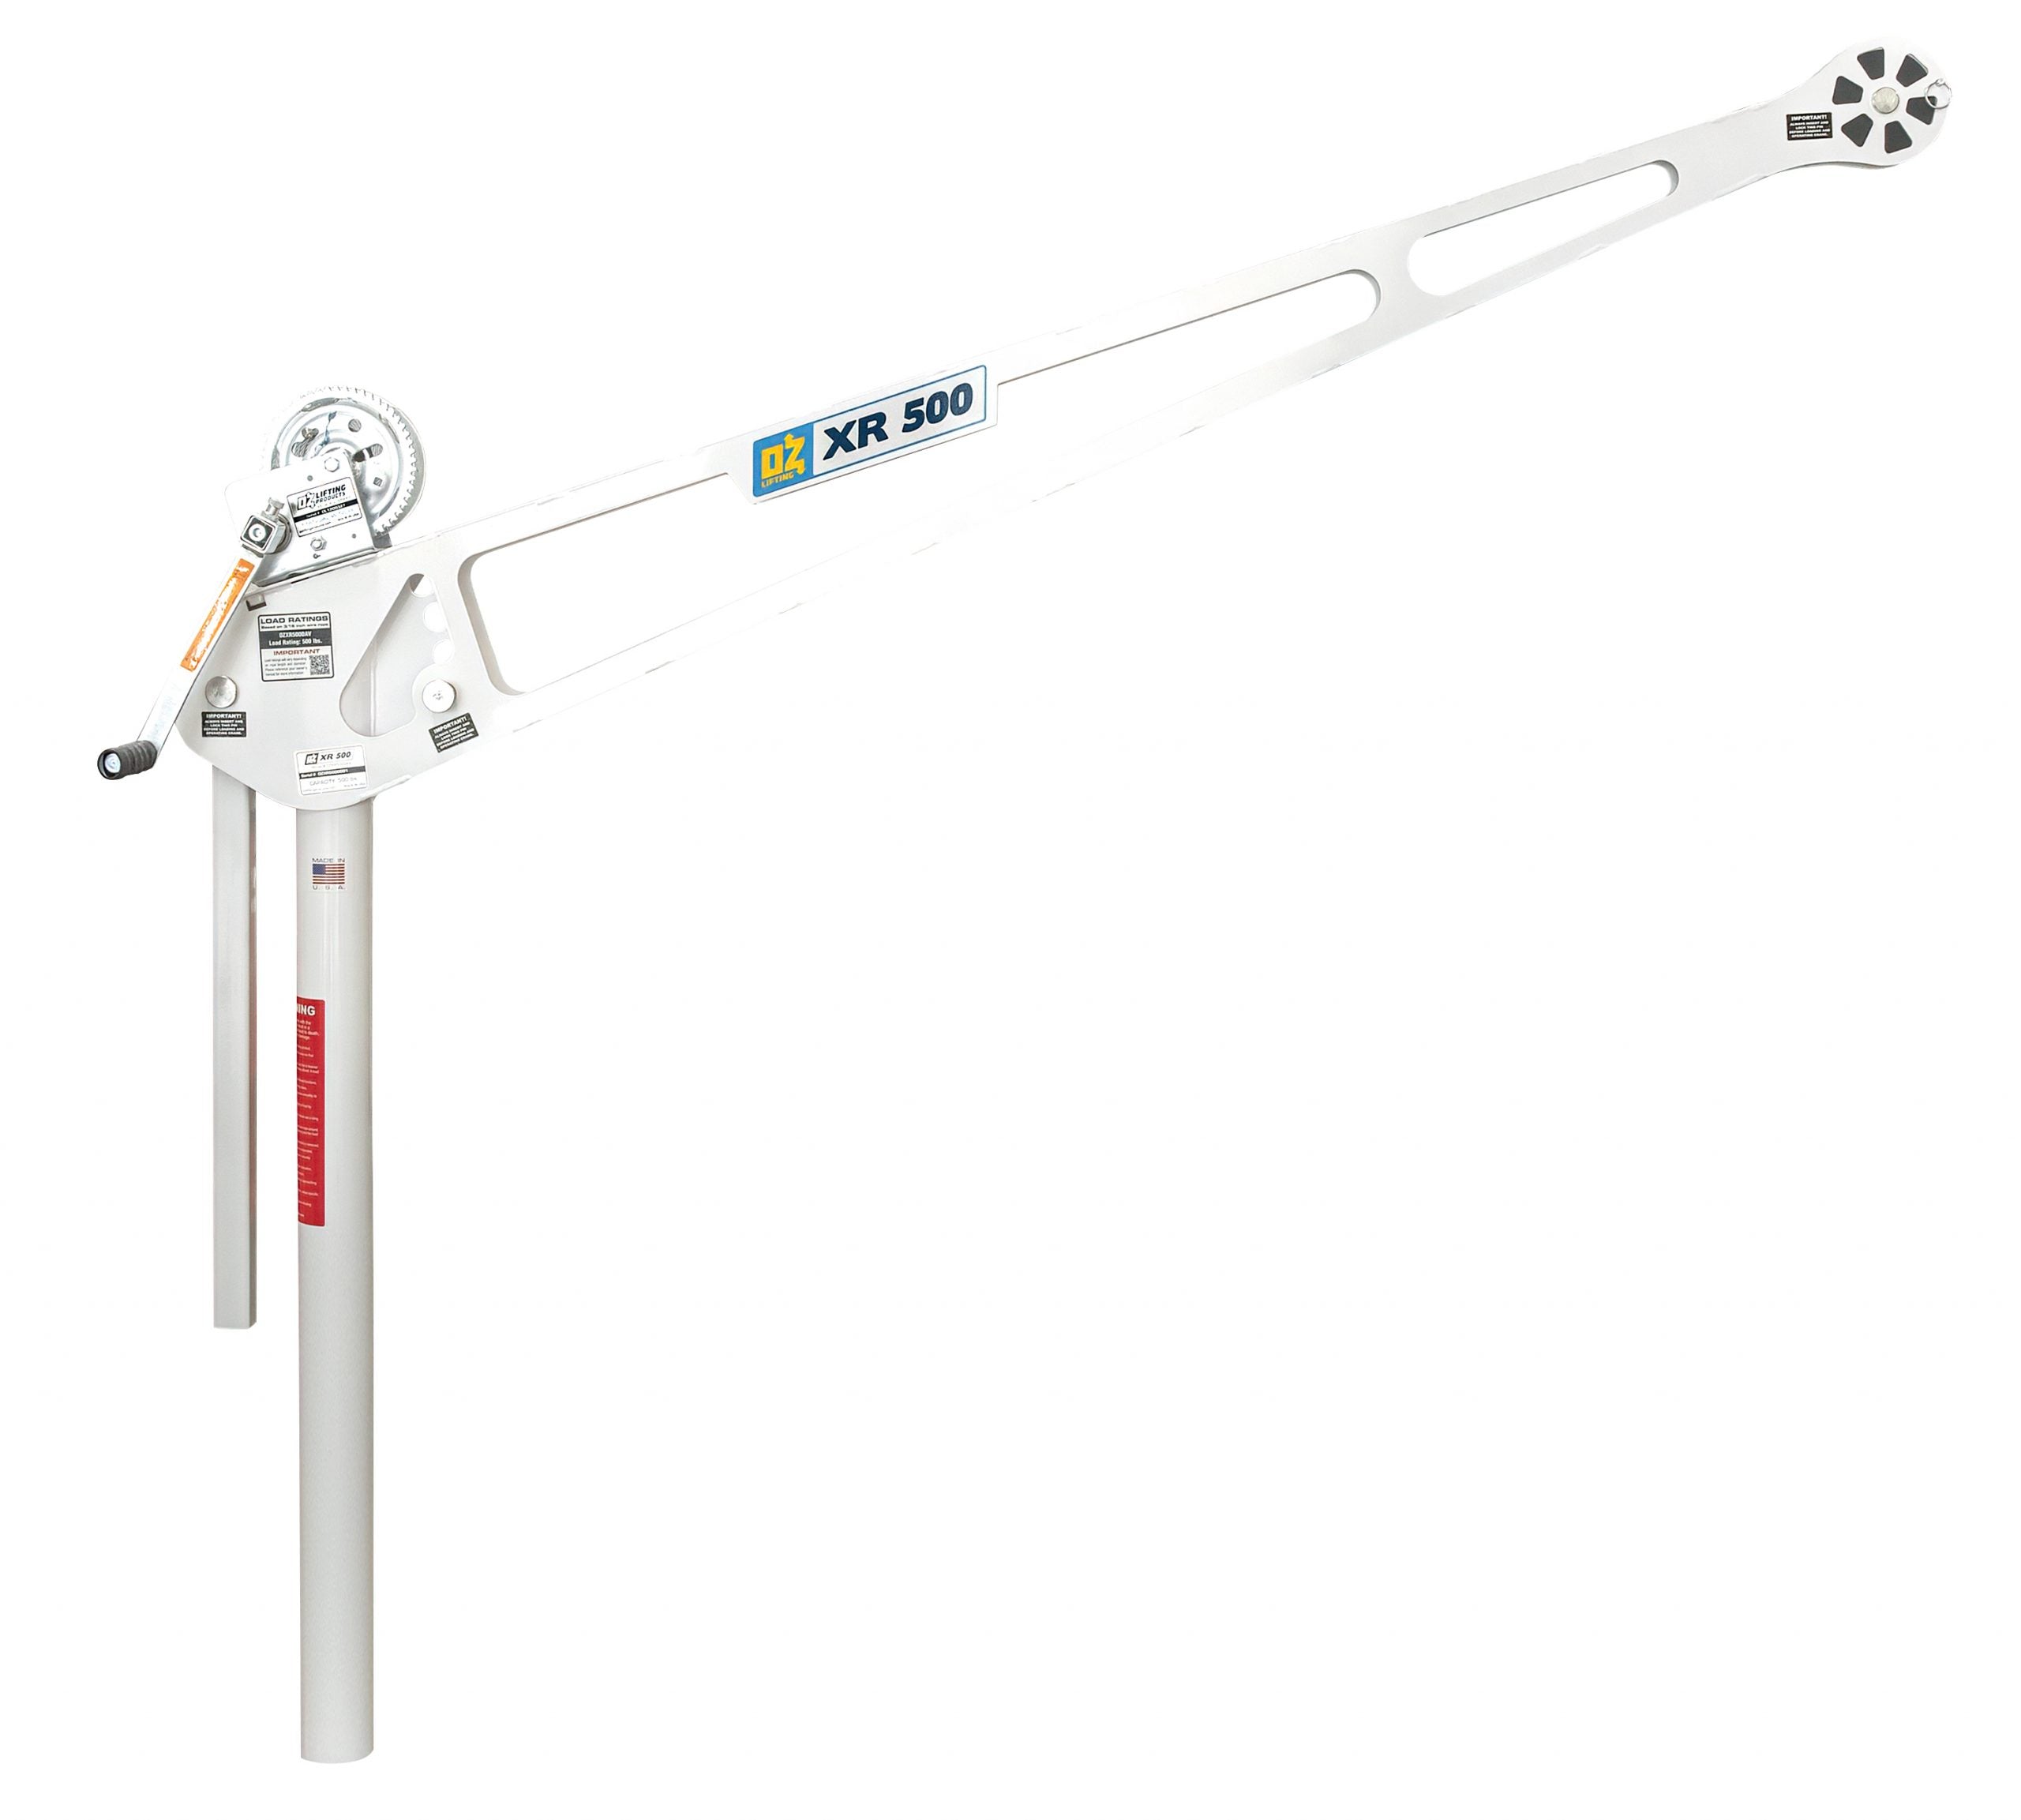 OZ Lifting XR Series Davit Crane with Manual Winch for Lifting Dinghies